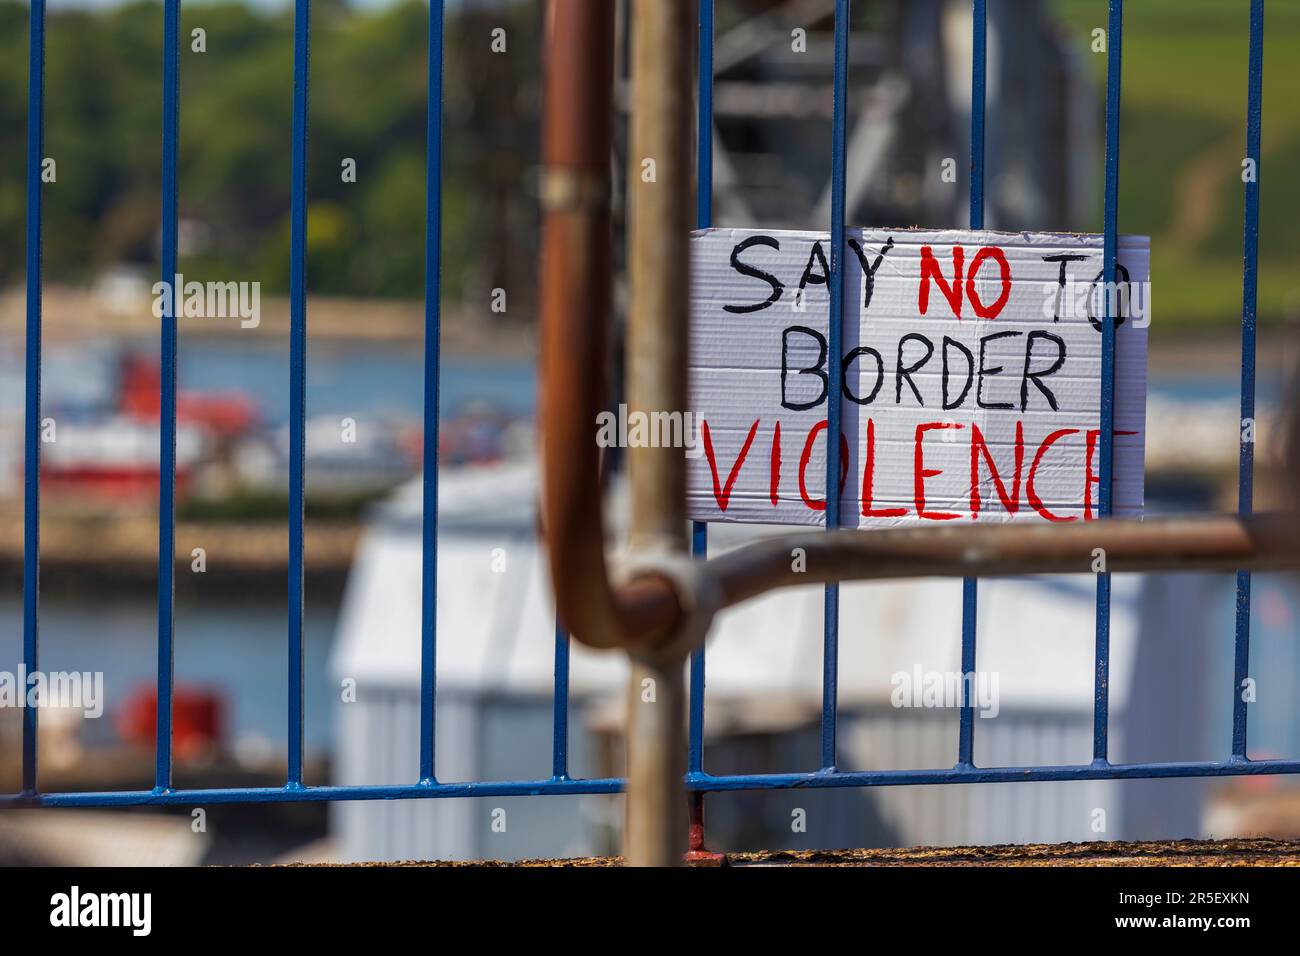 Falmouth's 2nd protest against the Bibby Stockholm vessel being modified by AP to hold 500 refugees Stock Photo